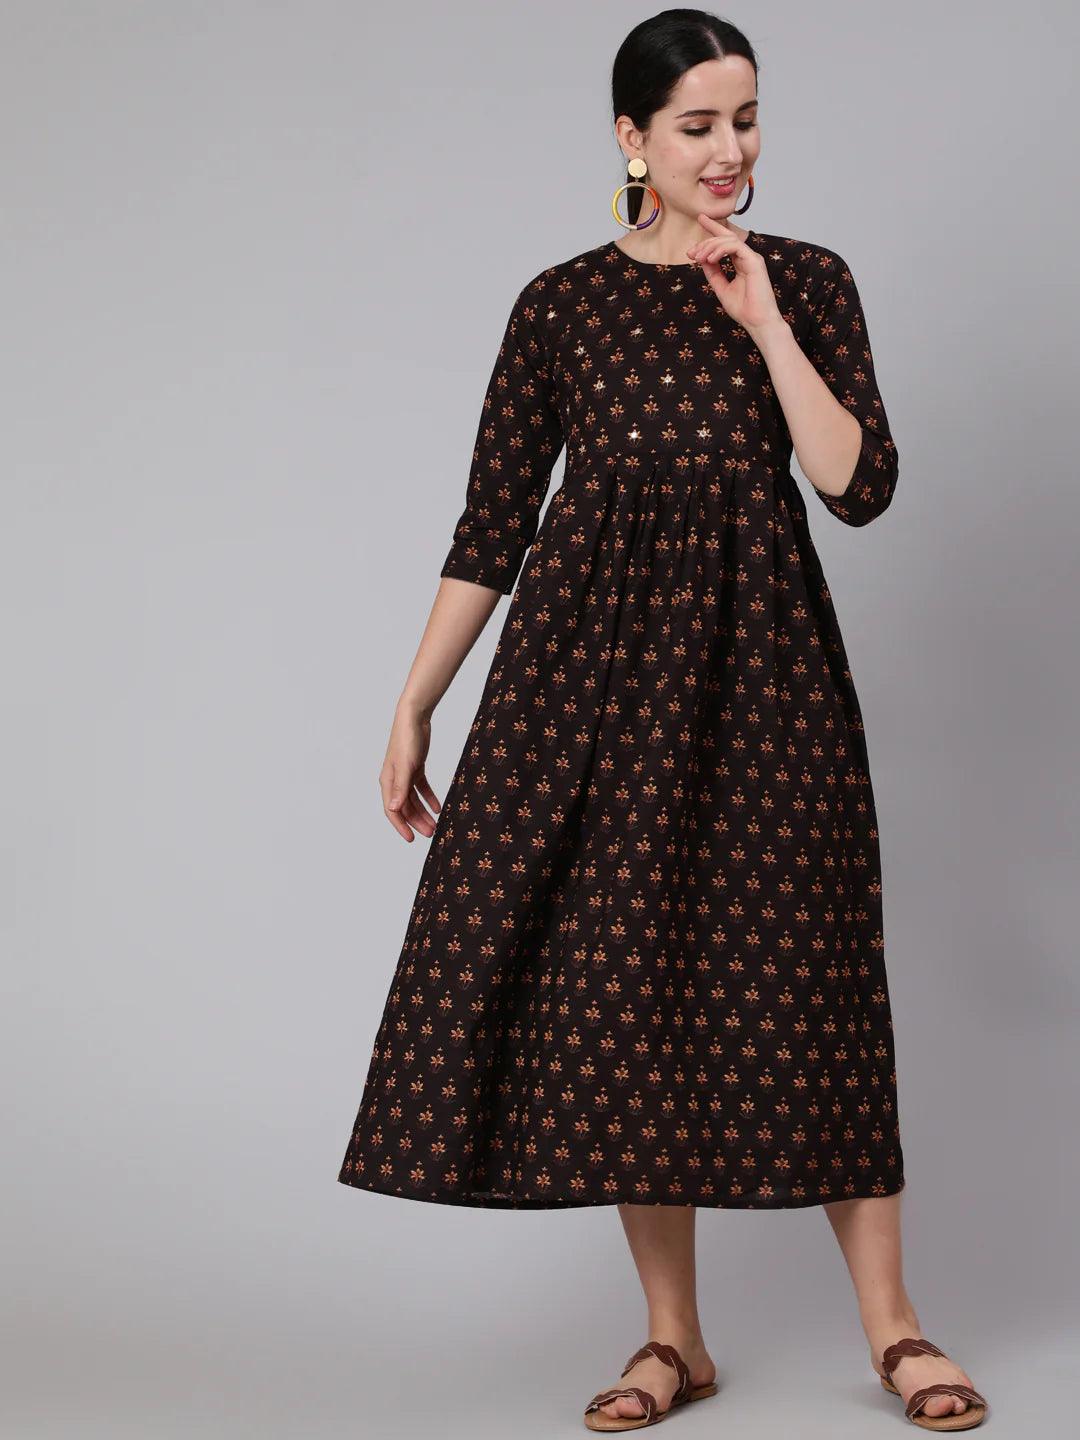 Women Brown Flared Dressfrom AASI - House of Nayo -NYDR4206 - moher.in